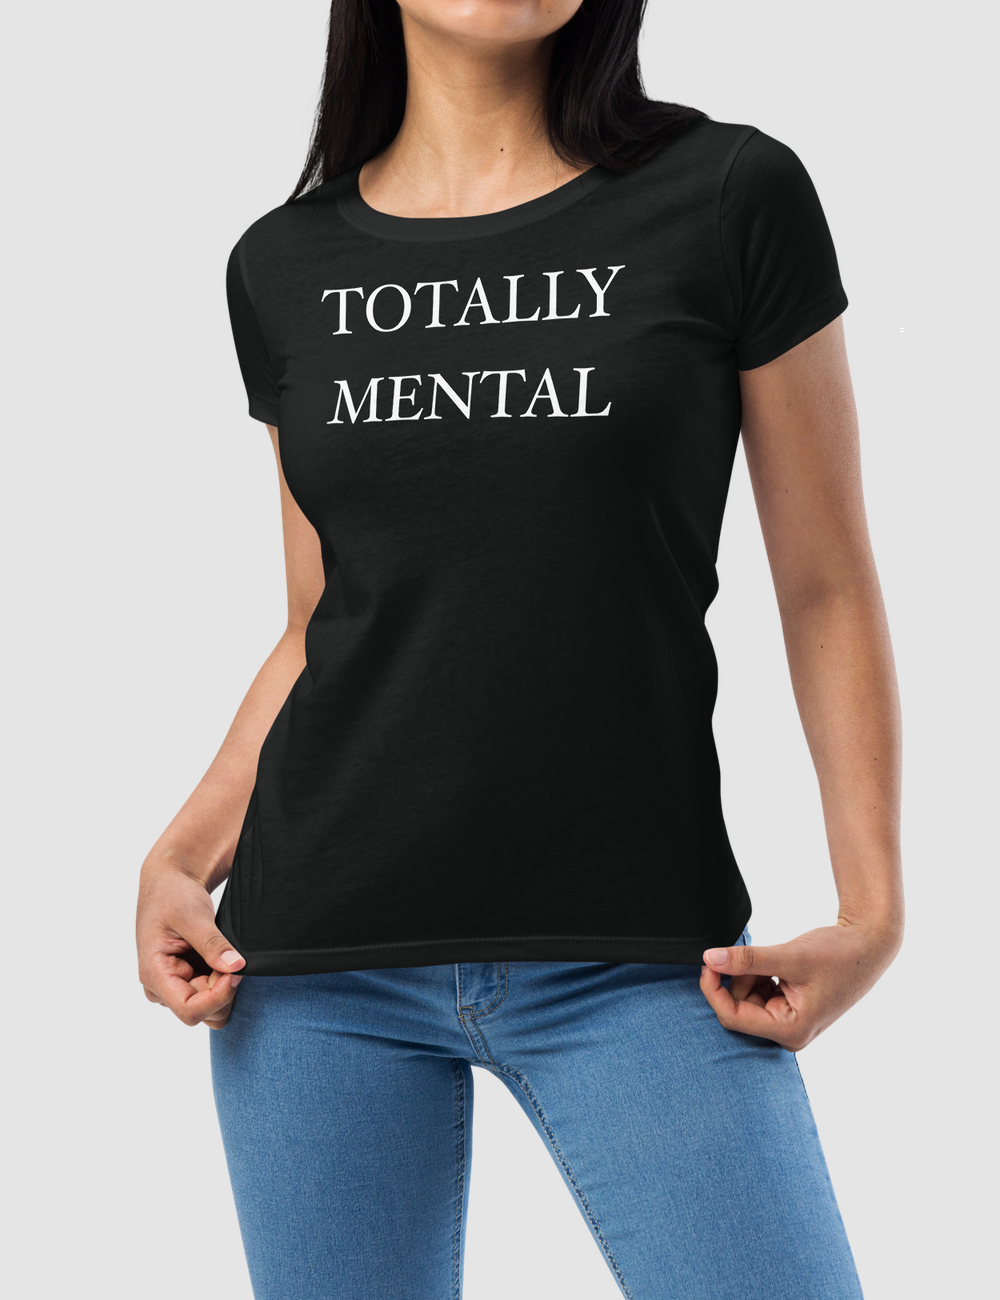 Totally Mental | Women's Fitted T-Shirt OniTakai